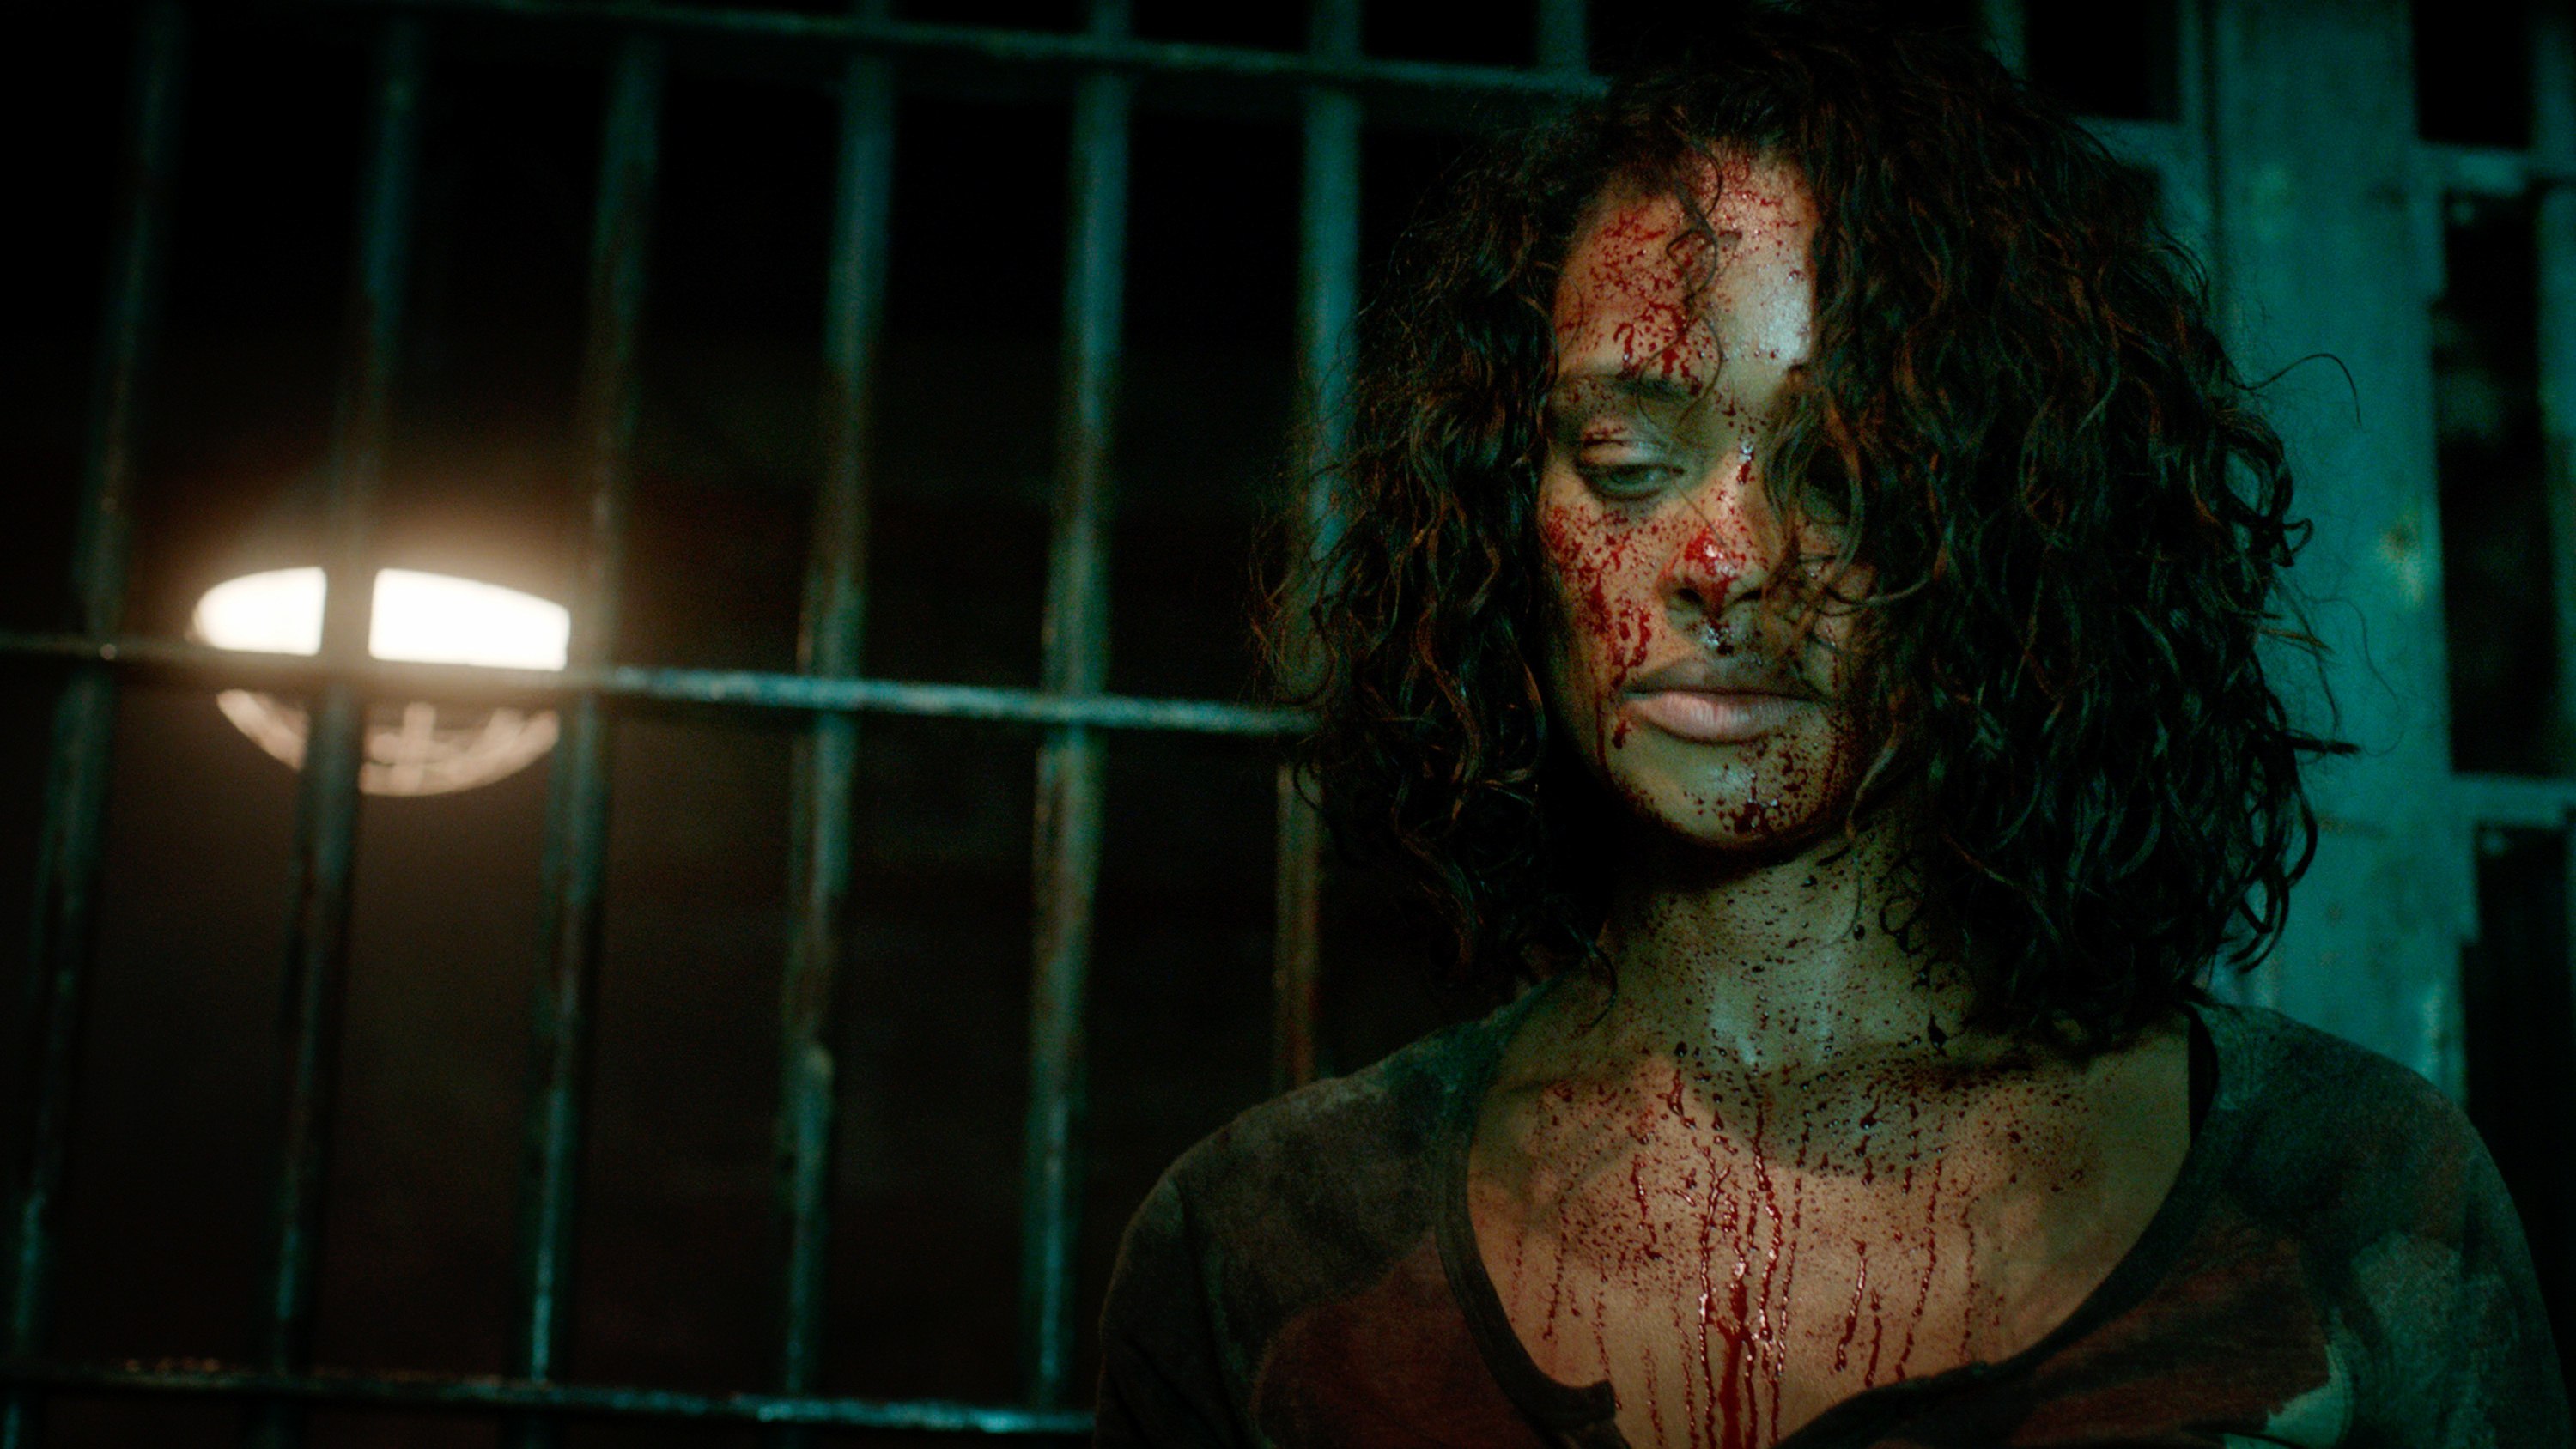 A woman, bloodied, looks down at something off screen